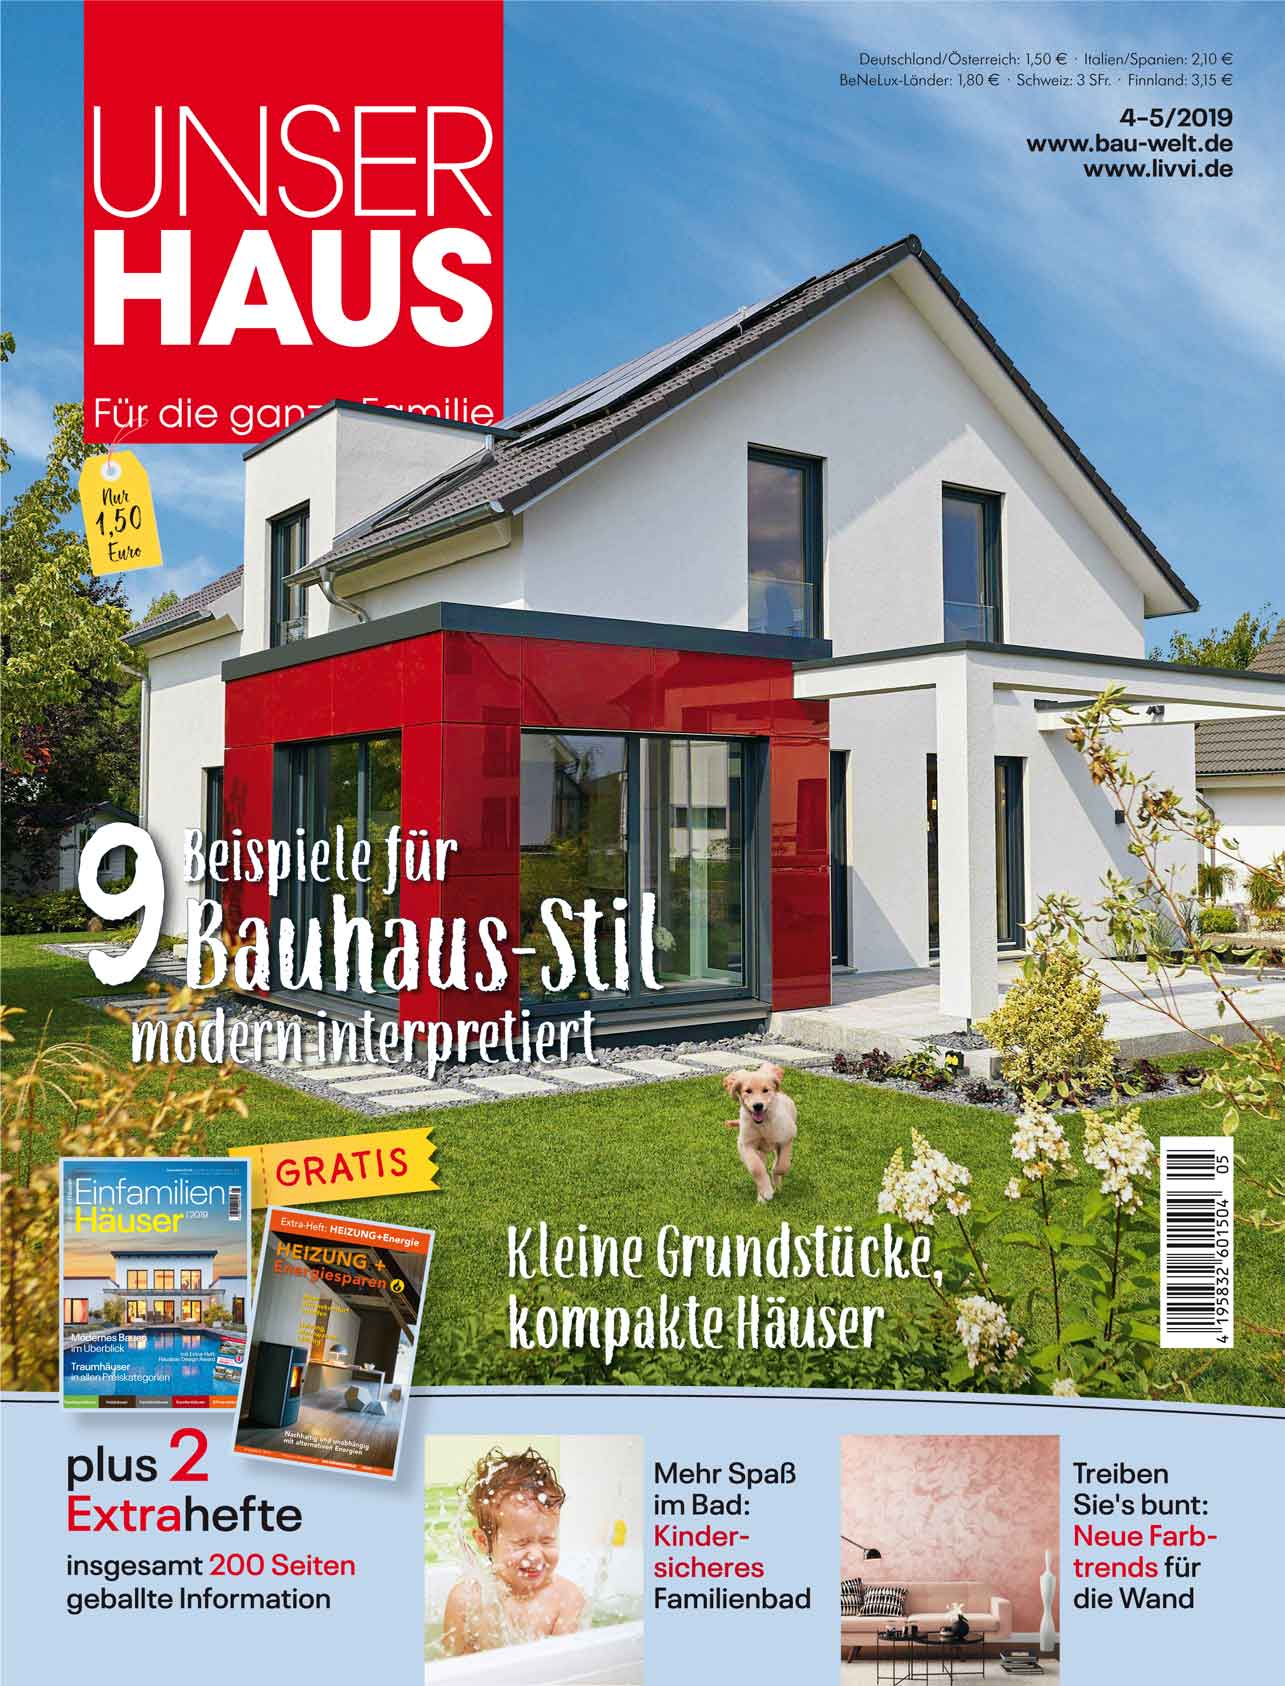 Unser Haus Cover 4-5-2019